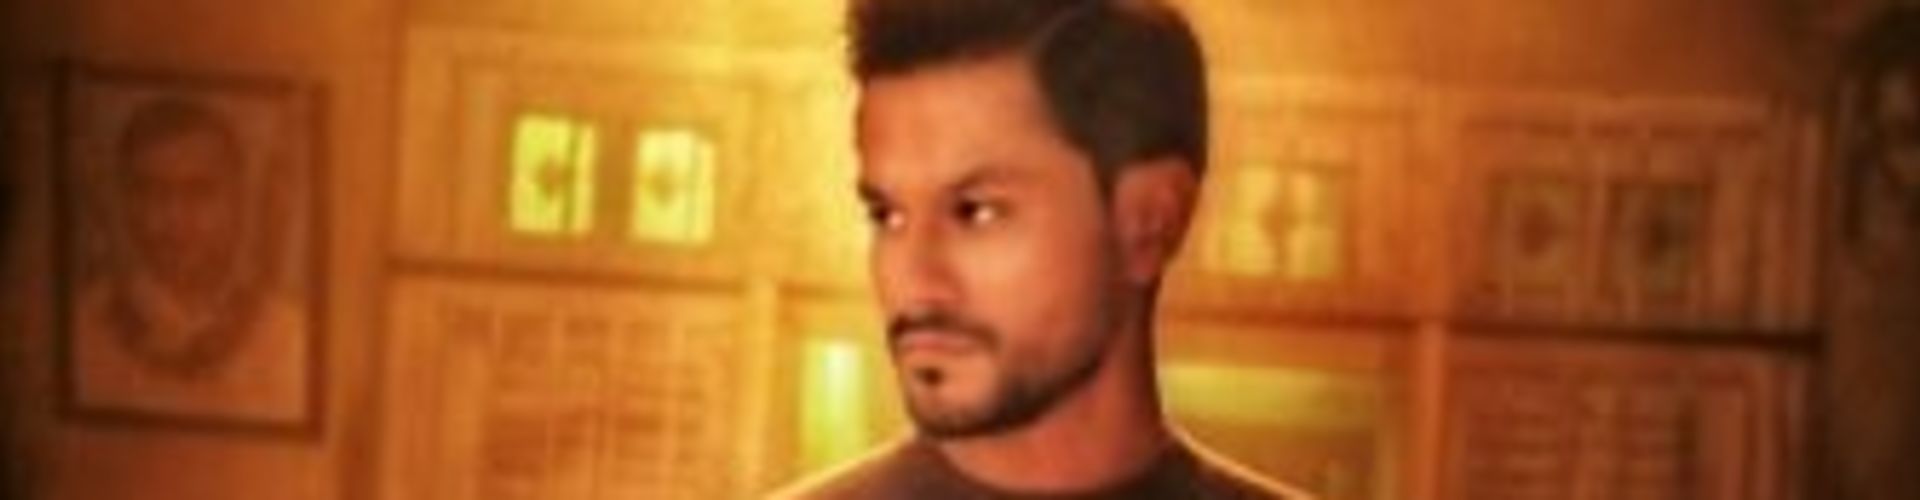 Kunal Khemu Starrer 'Abhay' Season 2 To Premiere On This Date, Trailer Out Soon!